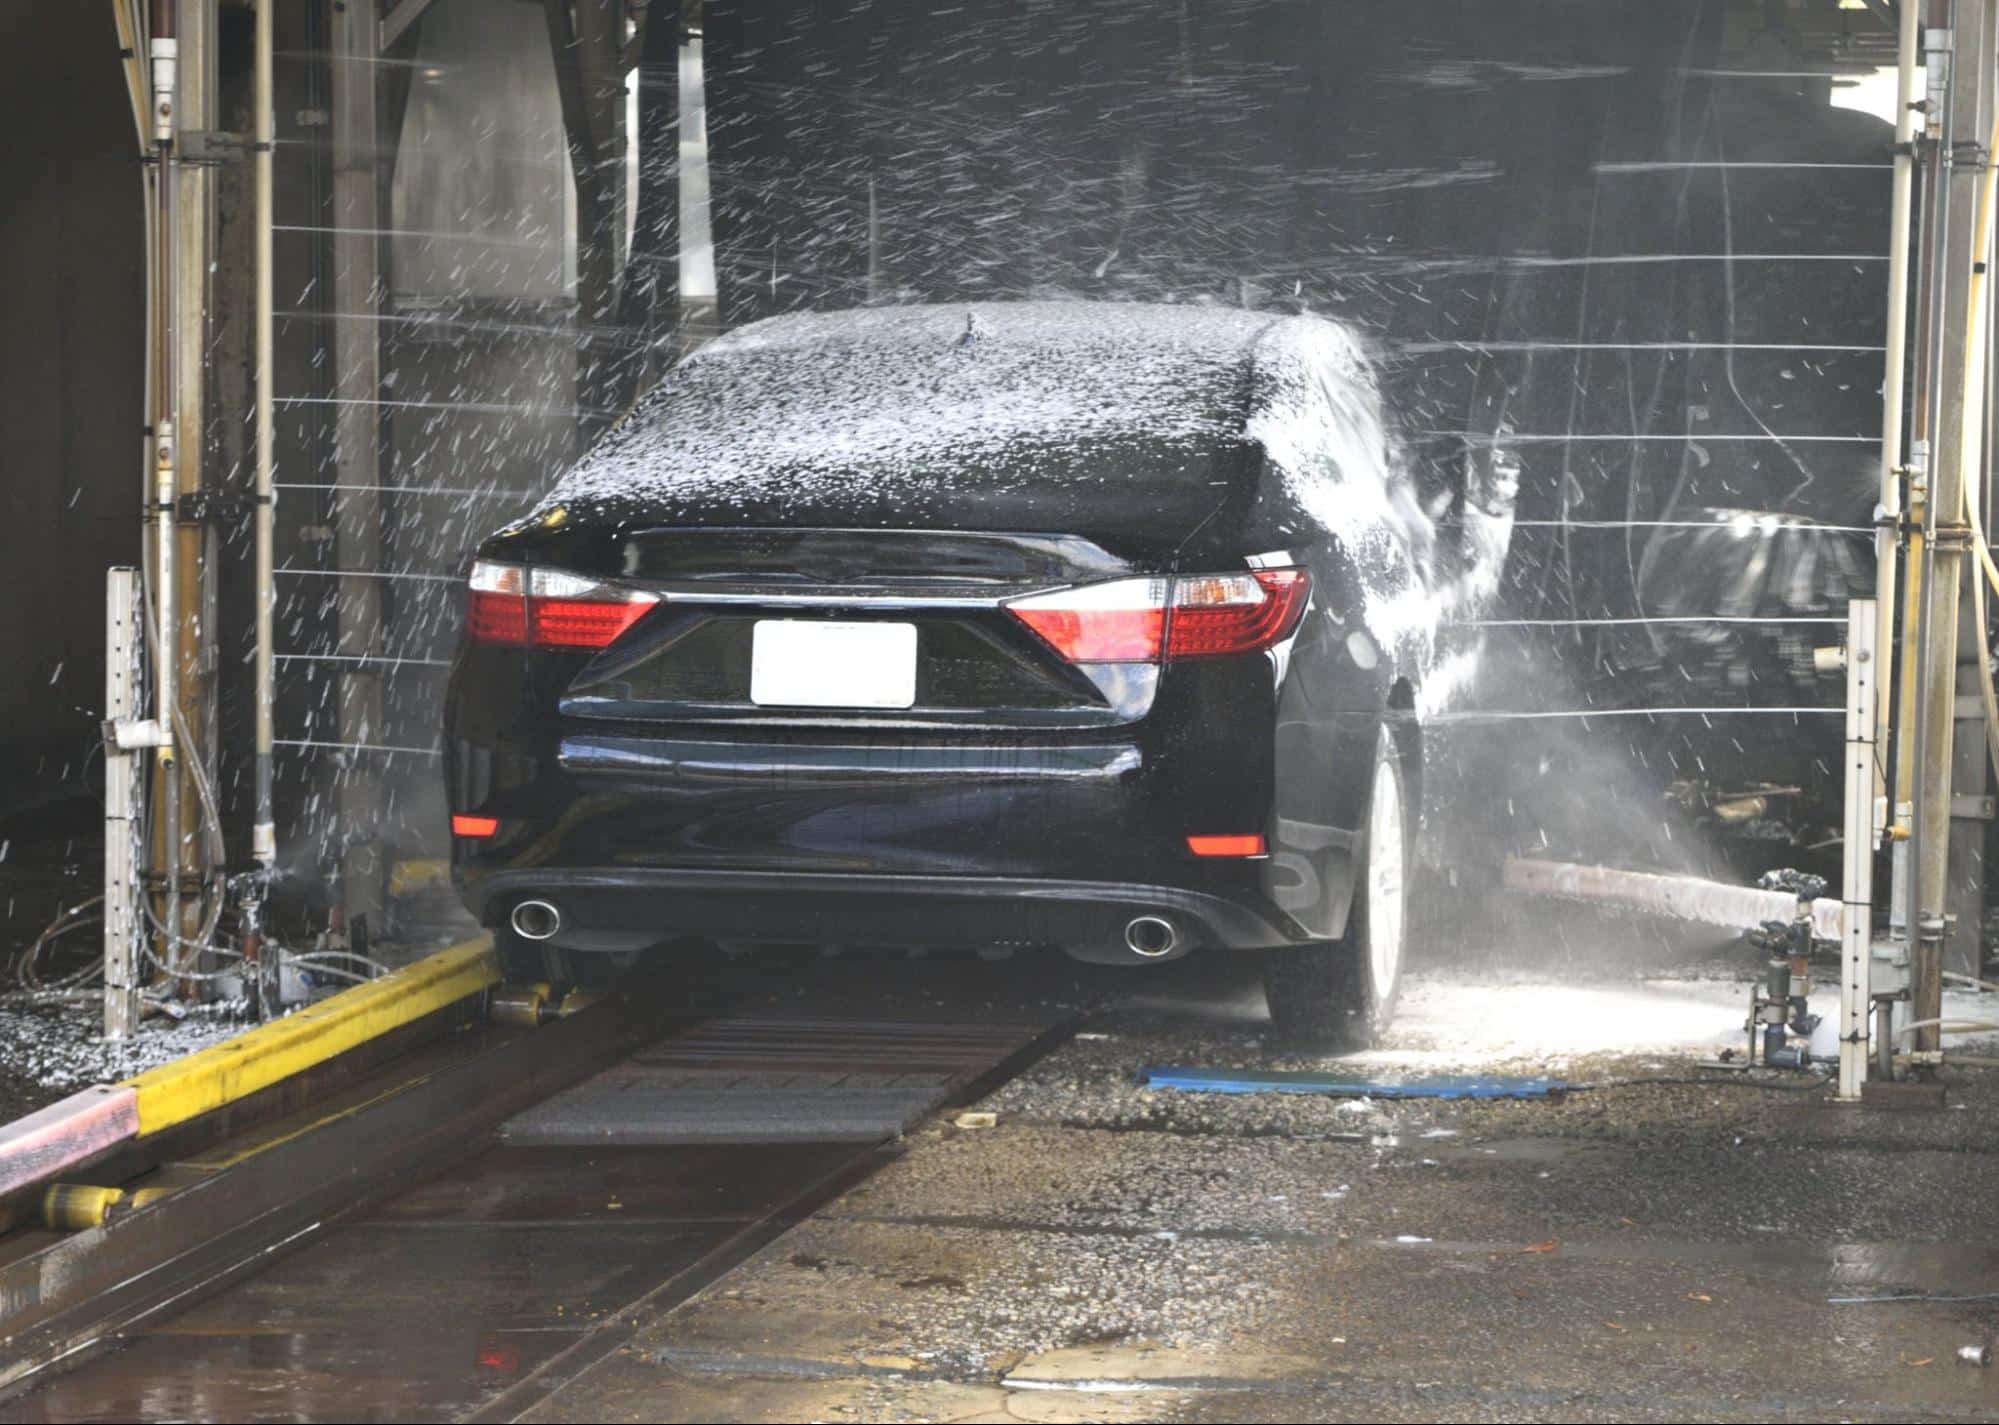 a black vehicle being washed